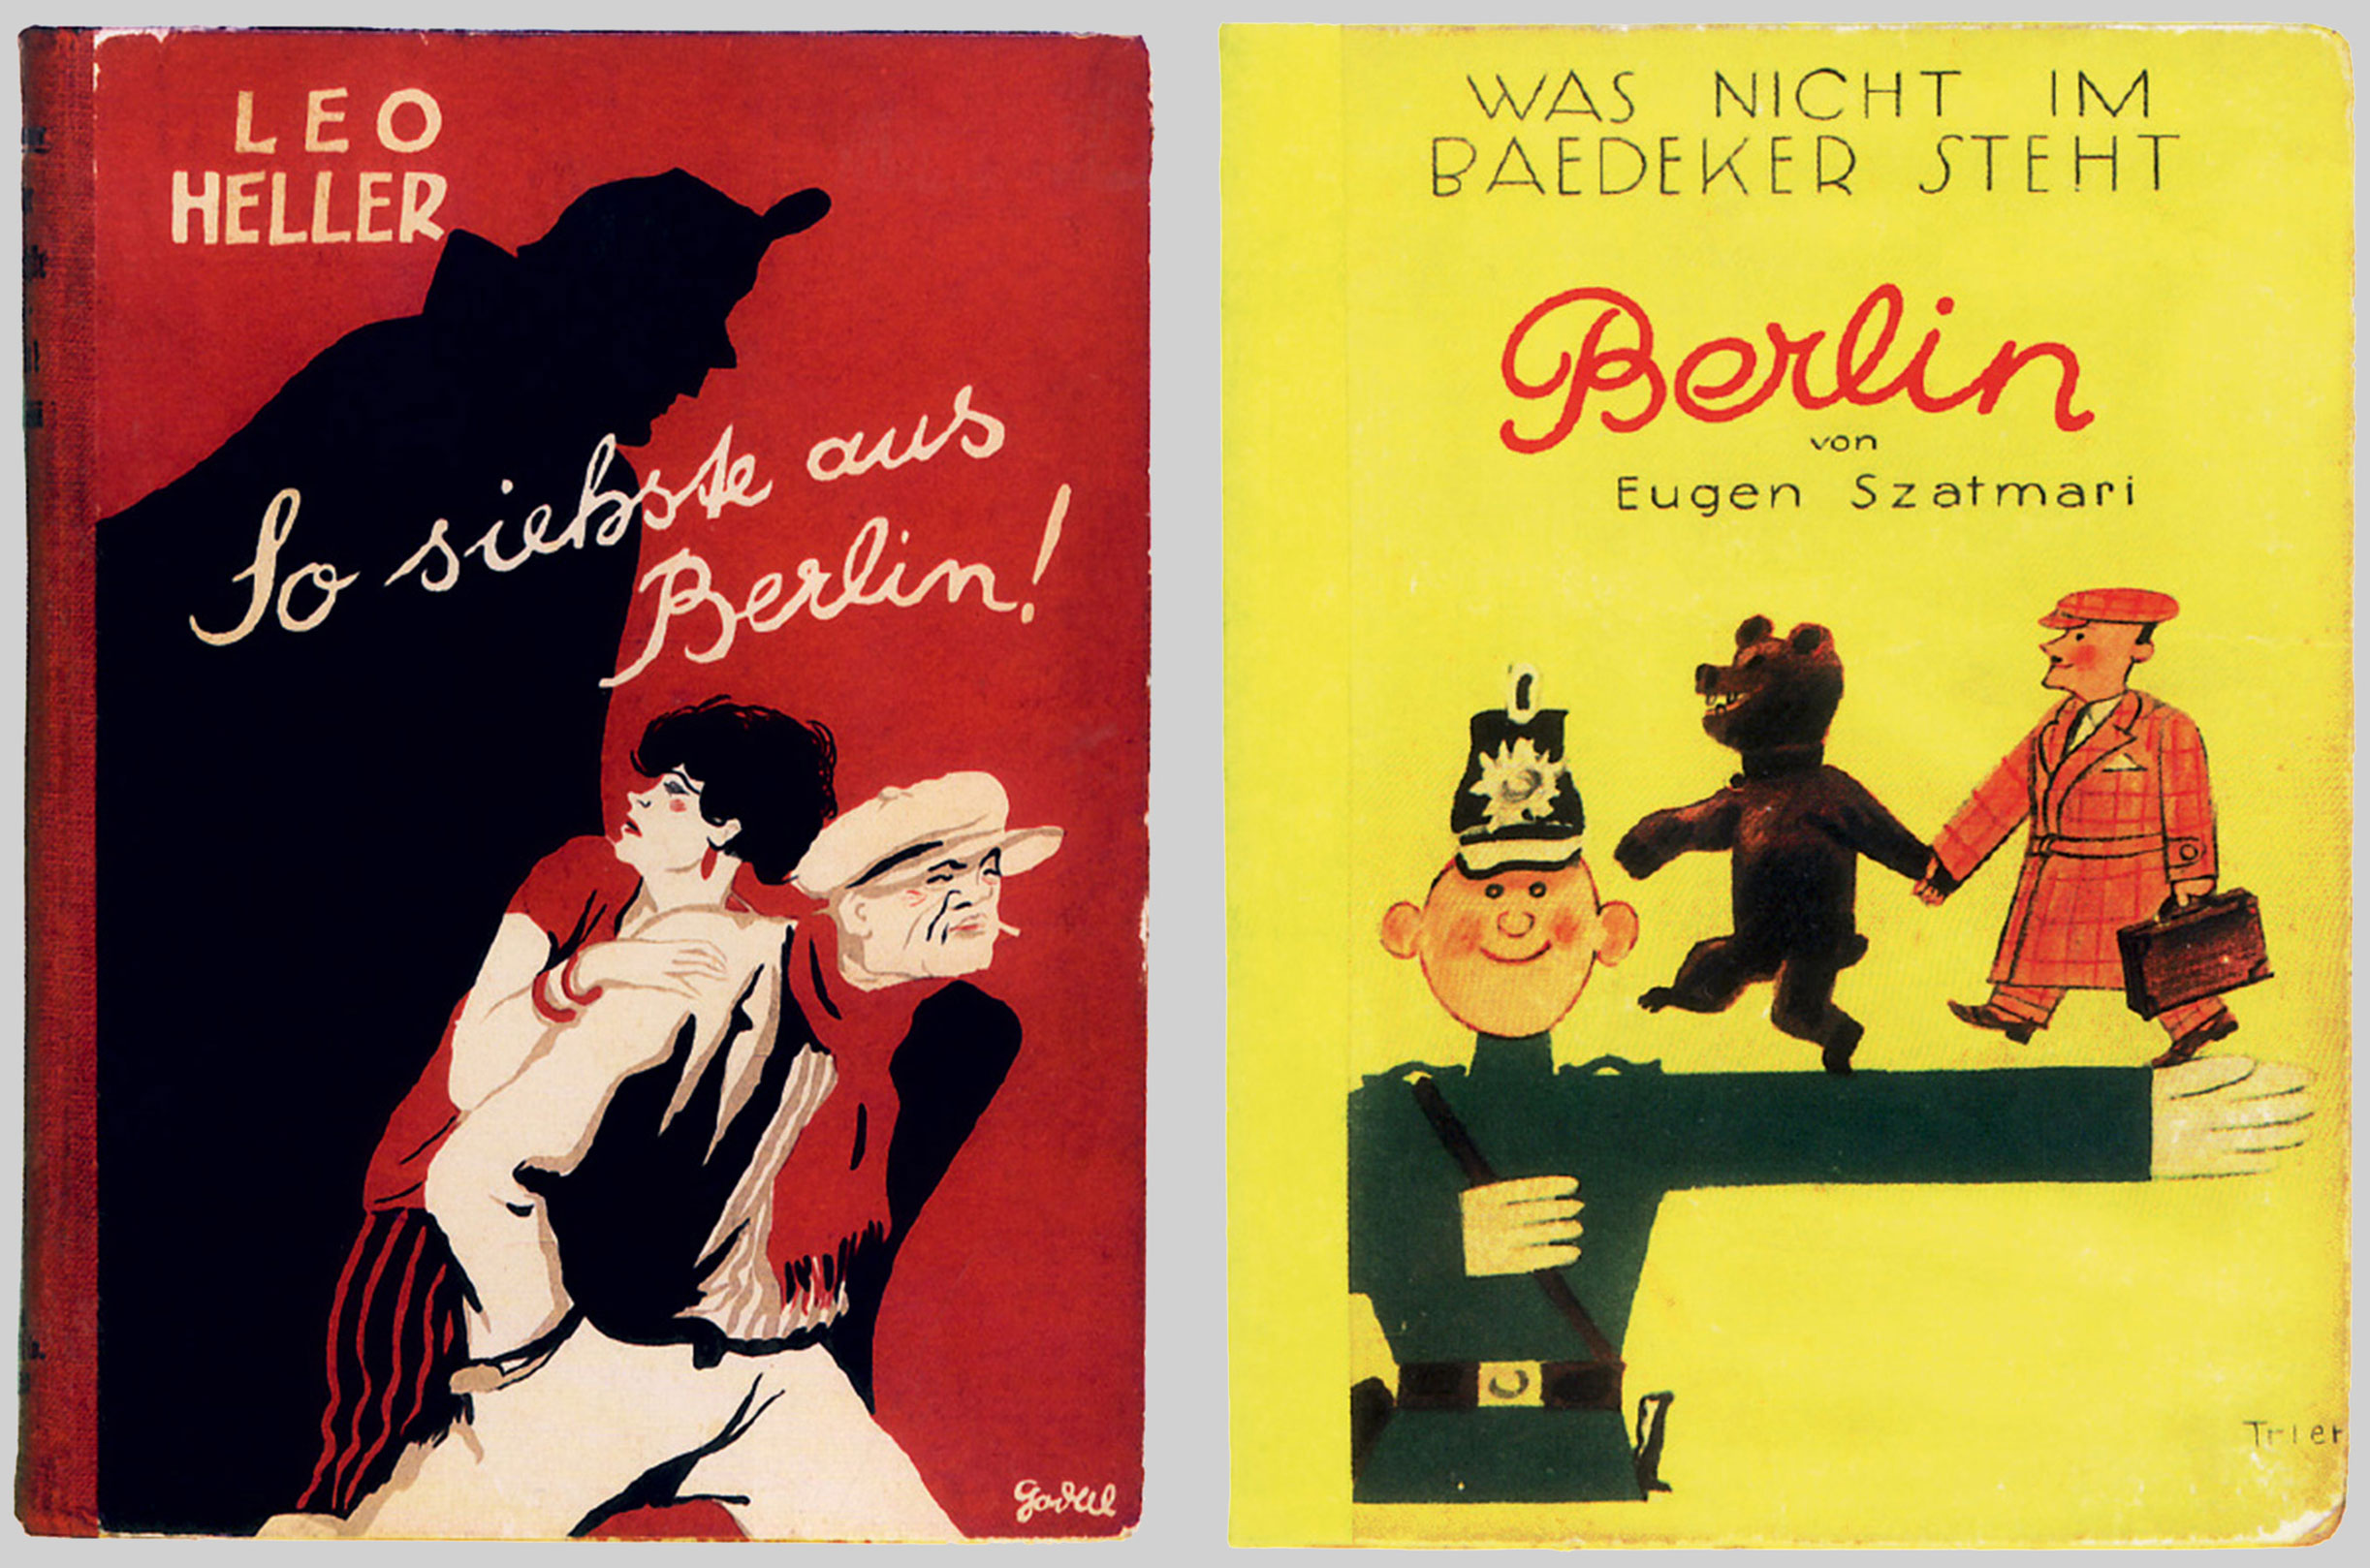 Two 1927 guides to nightlife in the Weimar capital. The first is titled So It Seems—Berlin! and the second is titled Berlin: What’s Not in the Baedecker Guide.